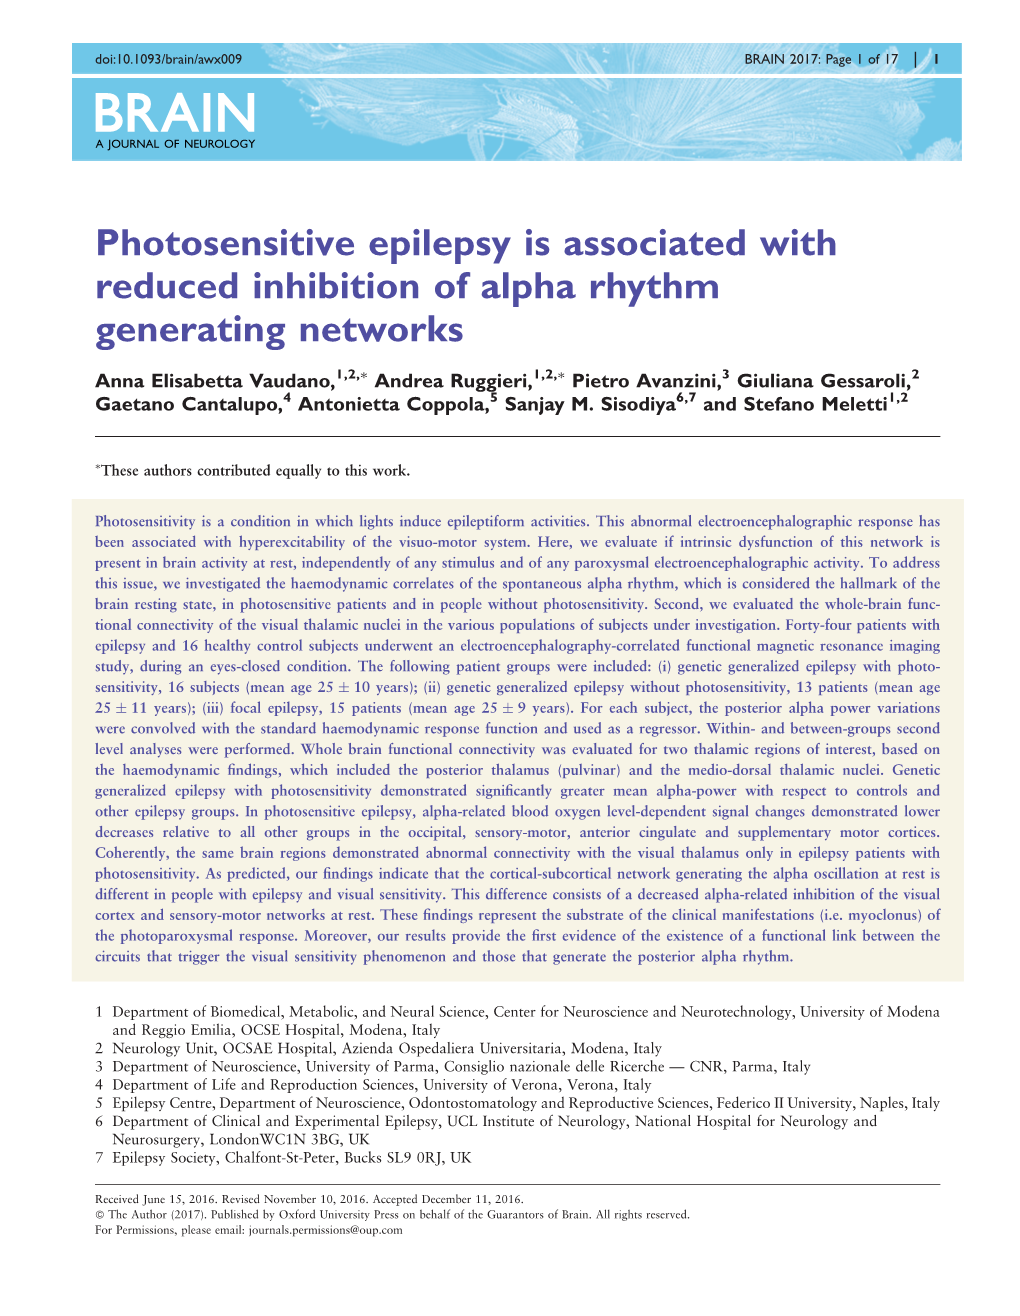 Photosensitive Epilepsy Is Associated with Reduced Inhibition of Alpha Rhythm Generating Networks